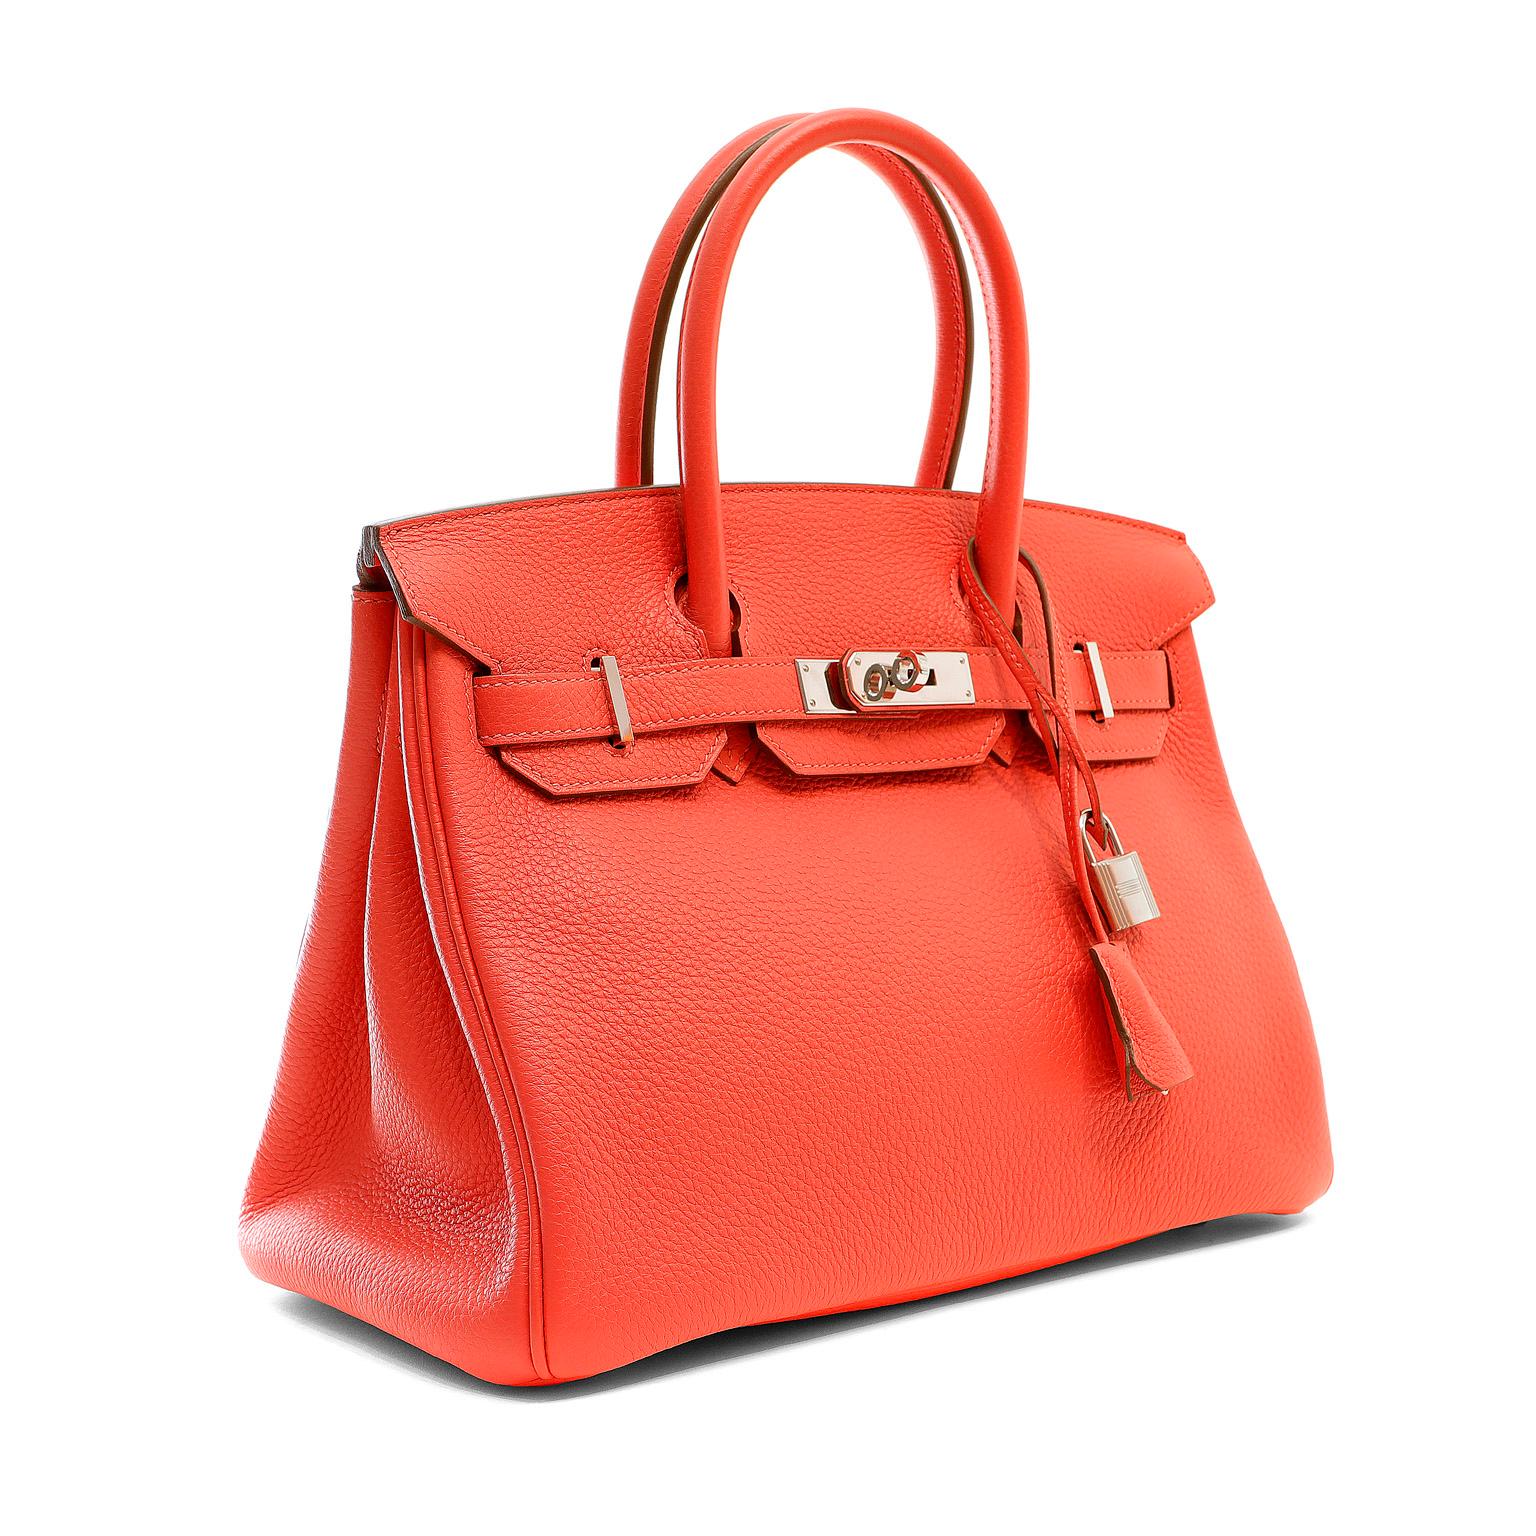 This authentic Hermès Rose Orange Togo 30 cm Birkin is in pristine condition.    Hand stitched by skilled craftsmen, wait lists of a year or more are common for the Hermès Birkin. Perfectly paired with Palladium hardware, this vibrant pinky orange